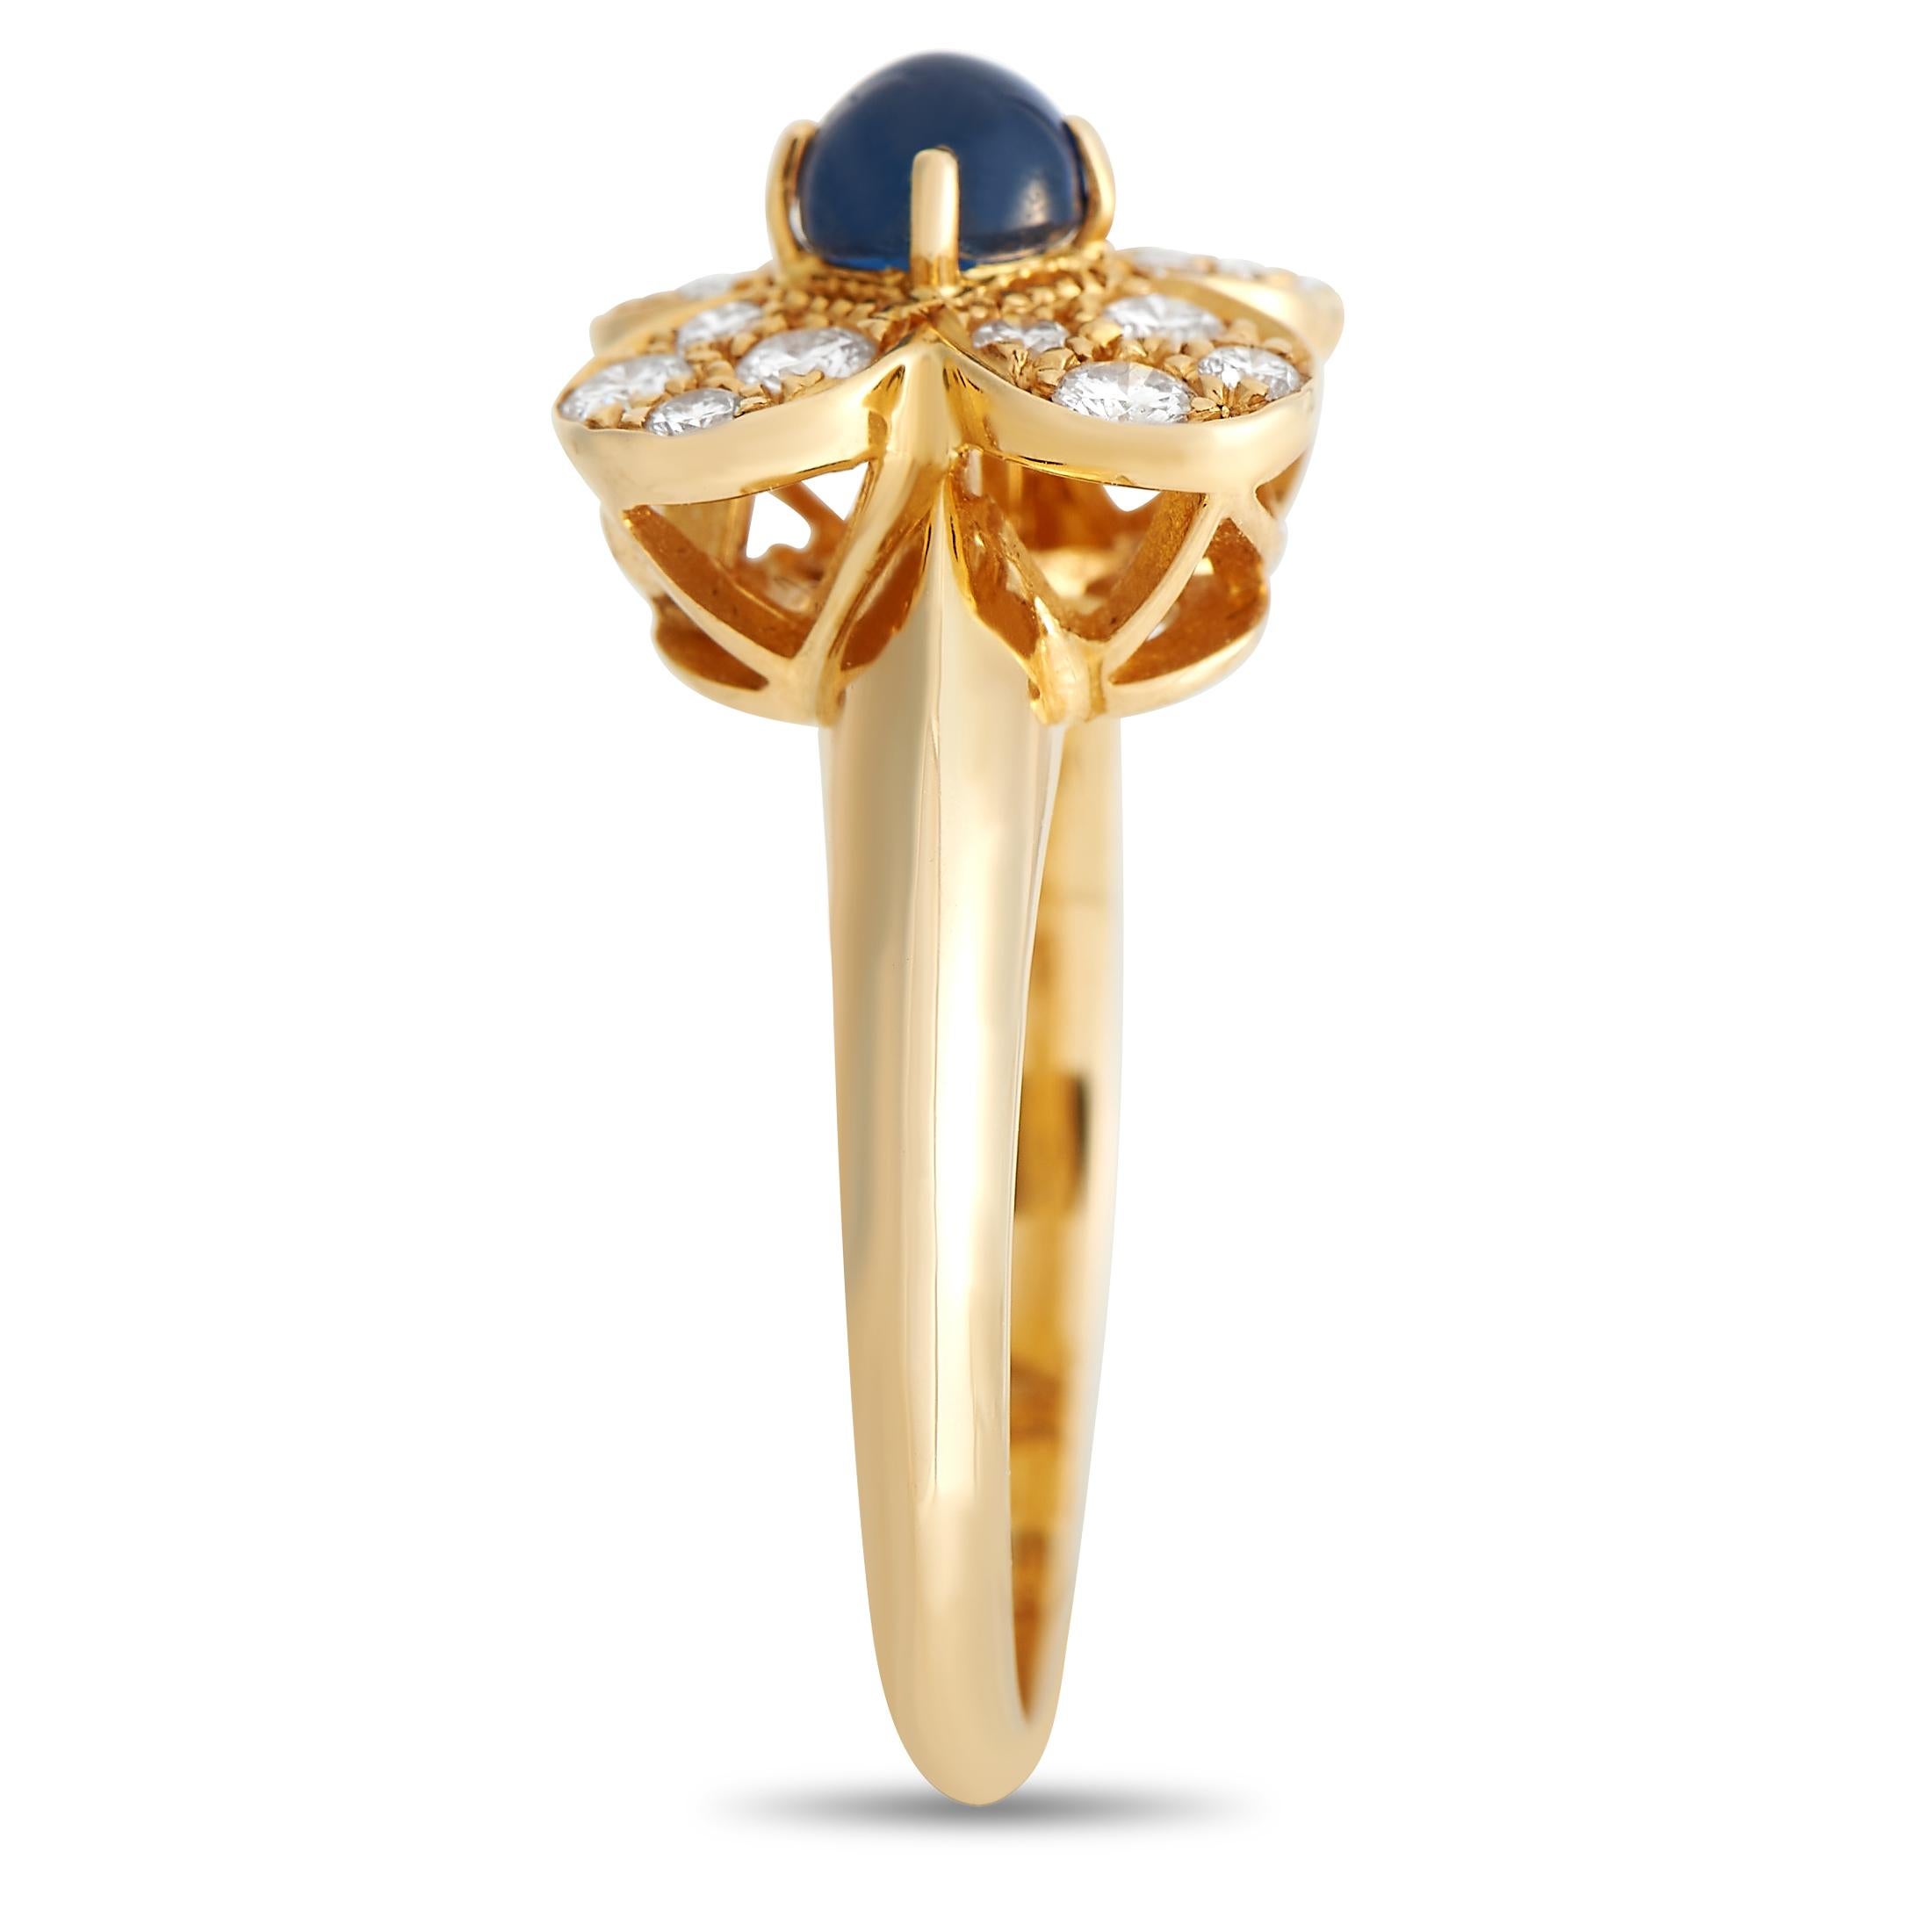 This Van Cleef & Arpels Trefle is a classic accessory that will never go out of style. A Sapphire cabochon makes a statement at the center of the clover motif, which is also elevated by sparkling inset diamonds. This piece’s 18K Yellow Gold setting